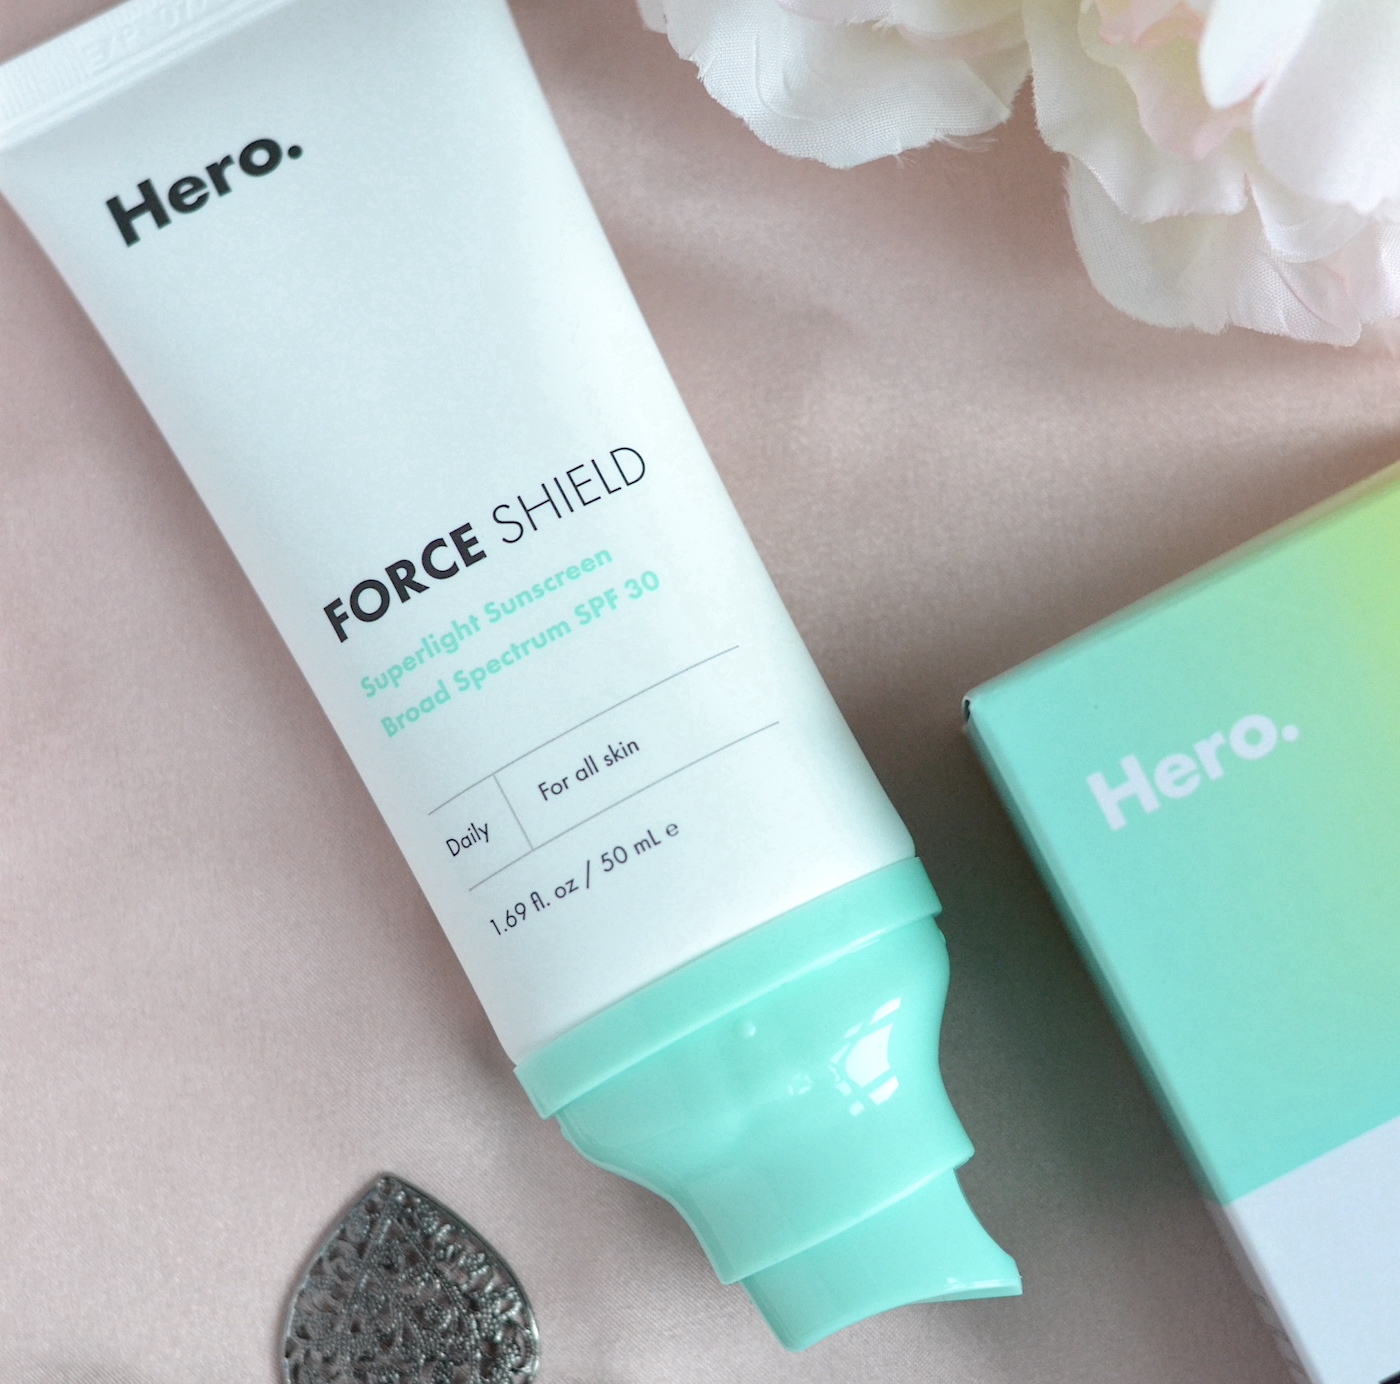 Hero Force Shield Superlight Sunscreen review